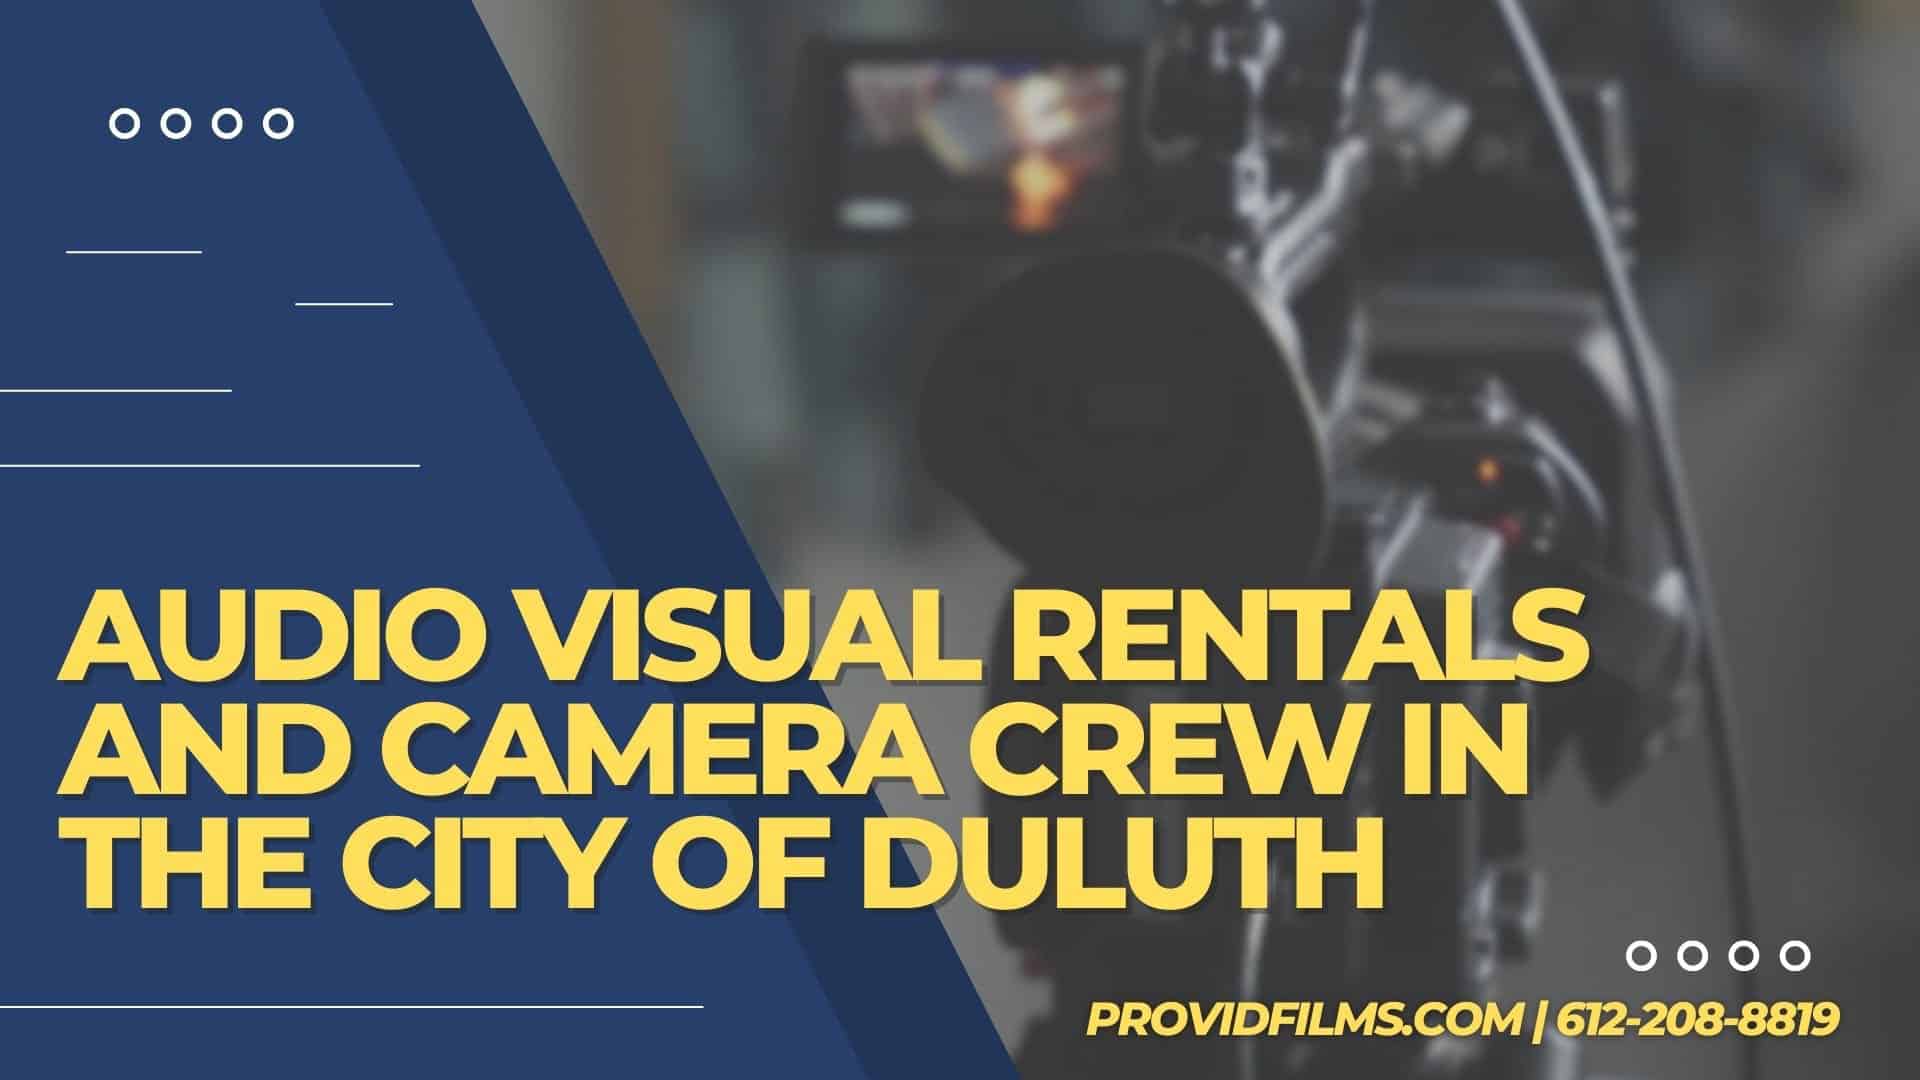 Graphic with a video camera crew with the text saying "AV Rental and Camera Crew in The City of Duluth"